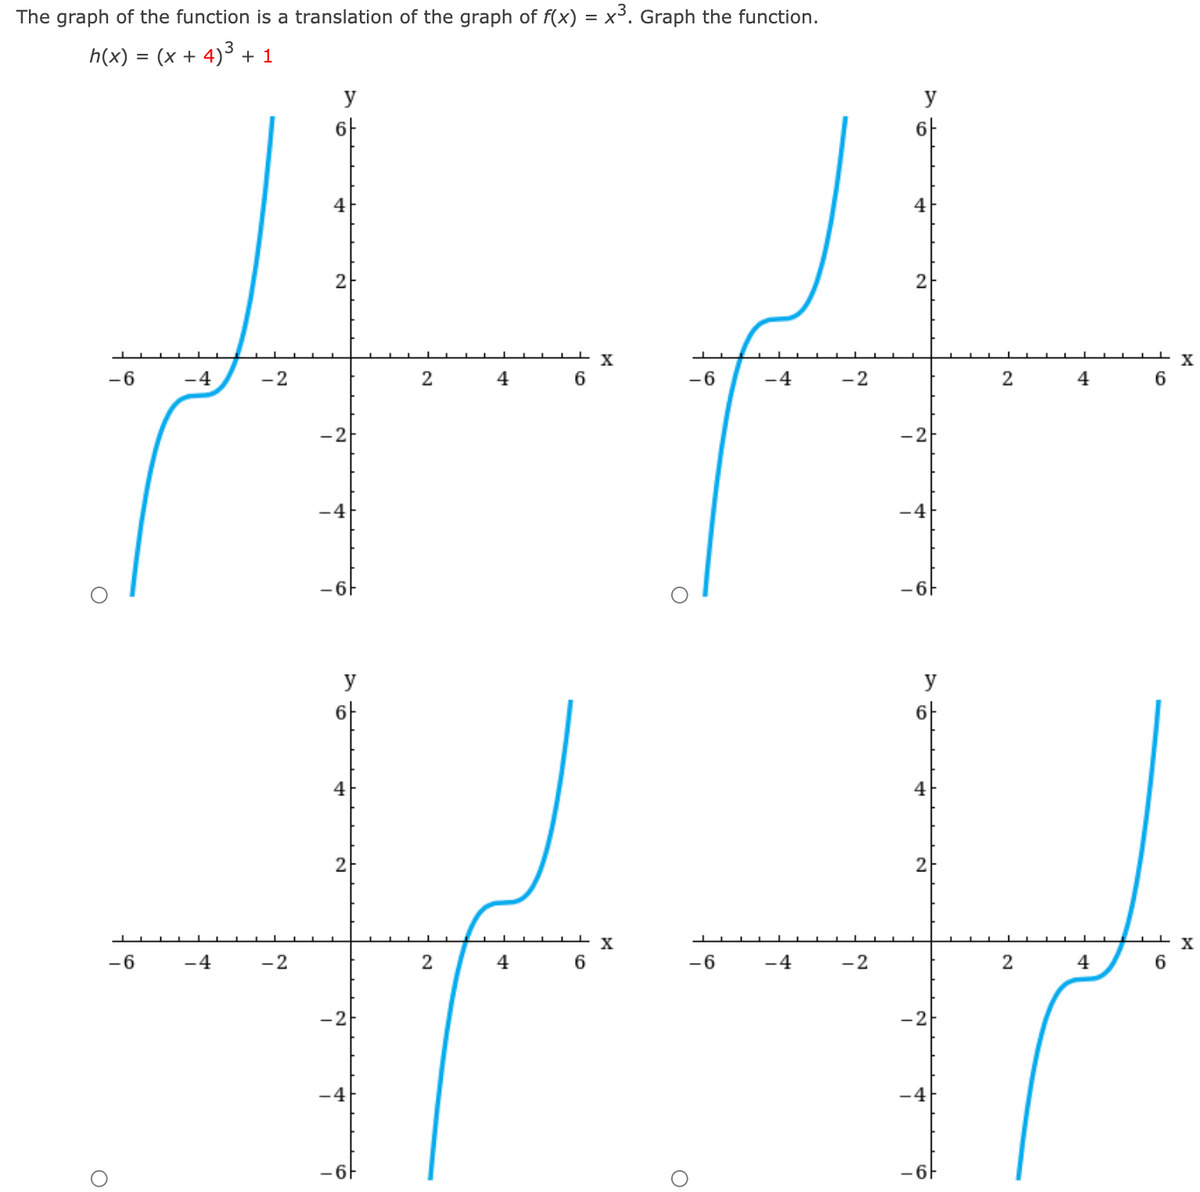 The graph of the function is a translation of the graph of f(x) = x³. Graph the function.
h(x) :
(x + 4)3 + 1
y
y
6-
4
4
2
2
X
-6
-4
-2
-6
-4
-2
2
4
6
-2
-2
-4
-6F
-6F
y
y
6-
6-
4
4
2
2
X
-6
-4
-2
2
4
-6
-4
-2
2
4
6
-2
-2
-4
-4
-6F
-6F
